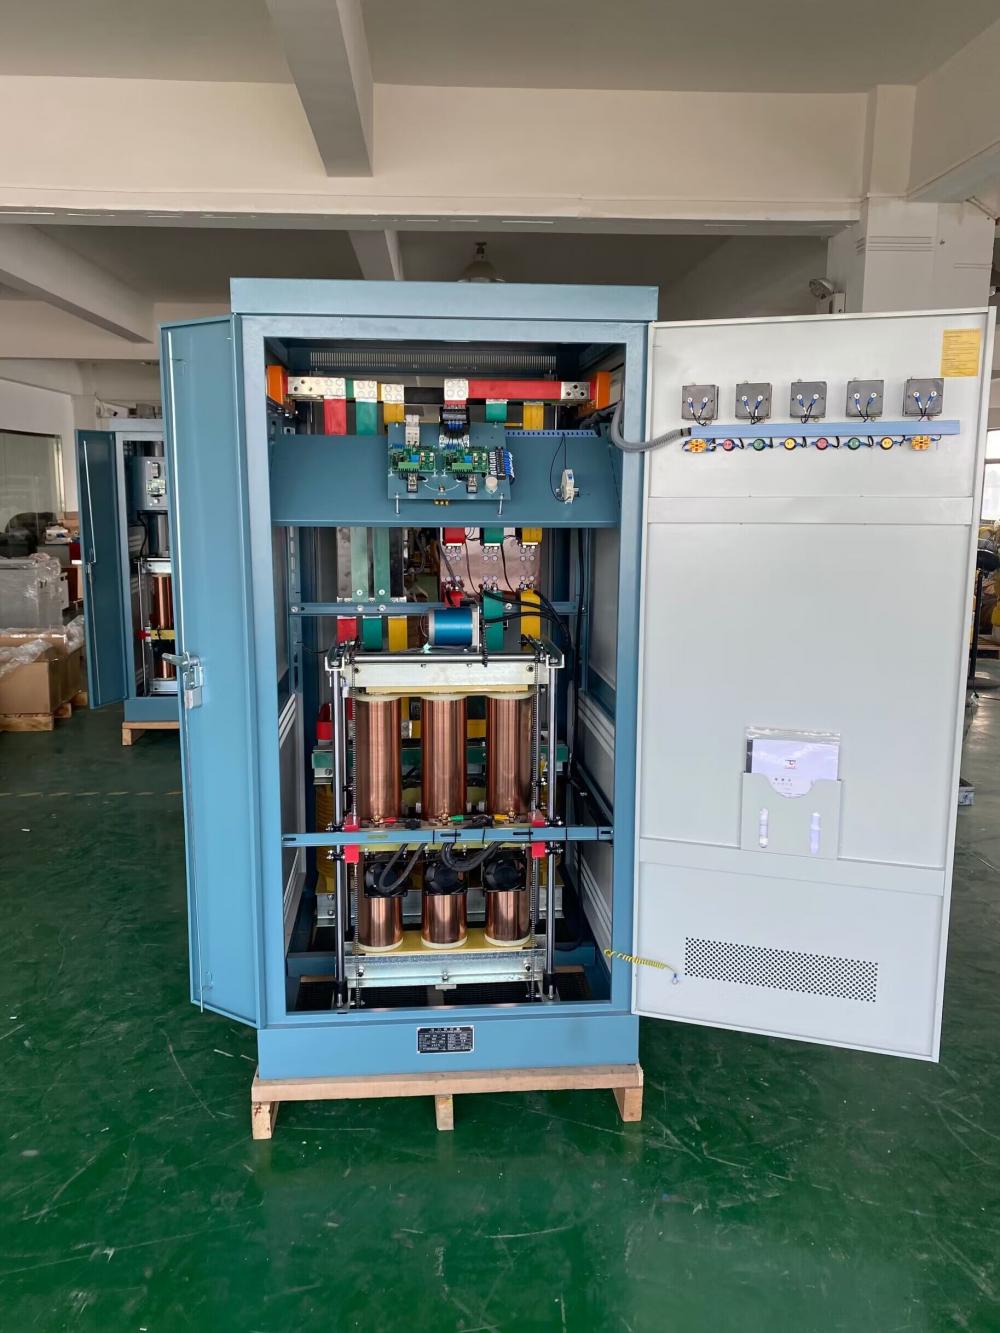 Three-phase high-power automatic voltage stabilizer 380V China Manufacturer